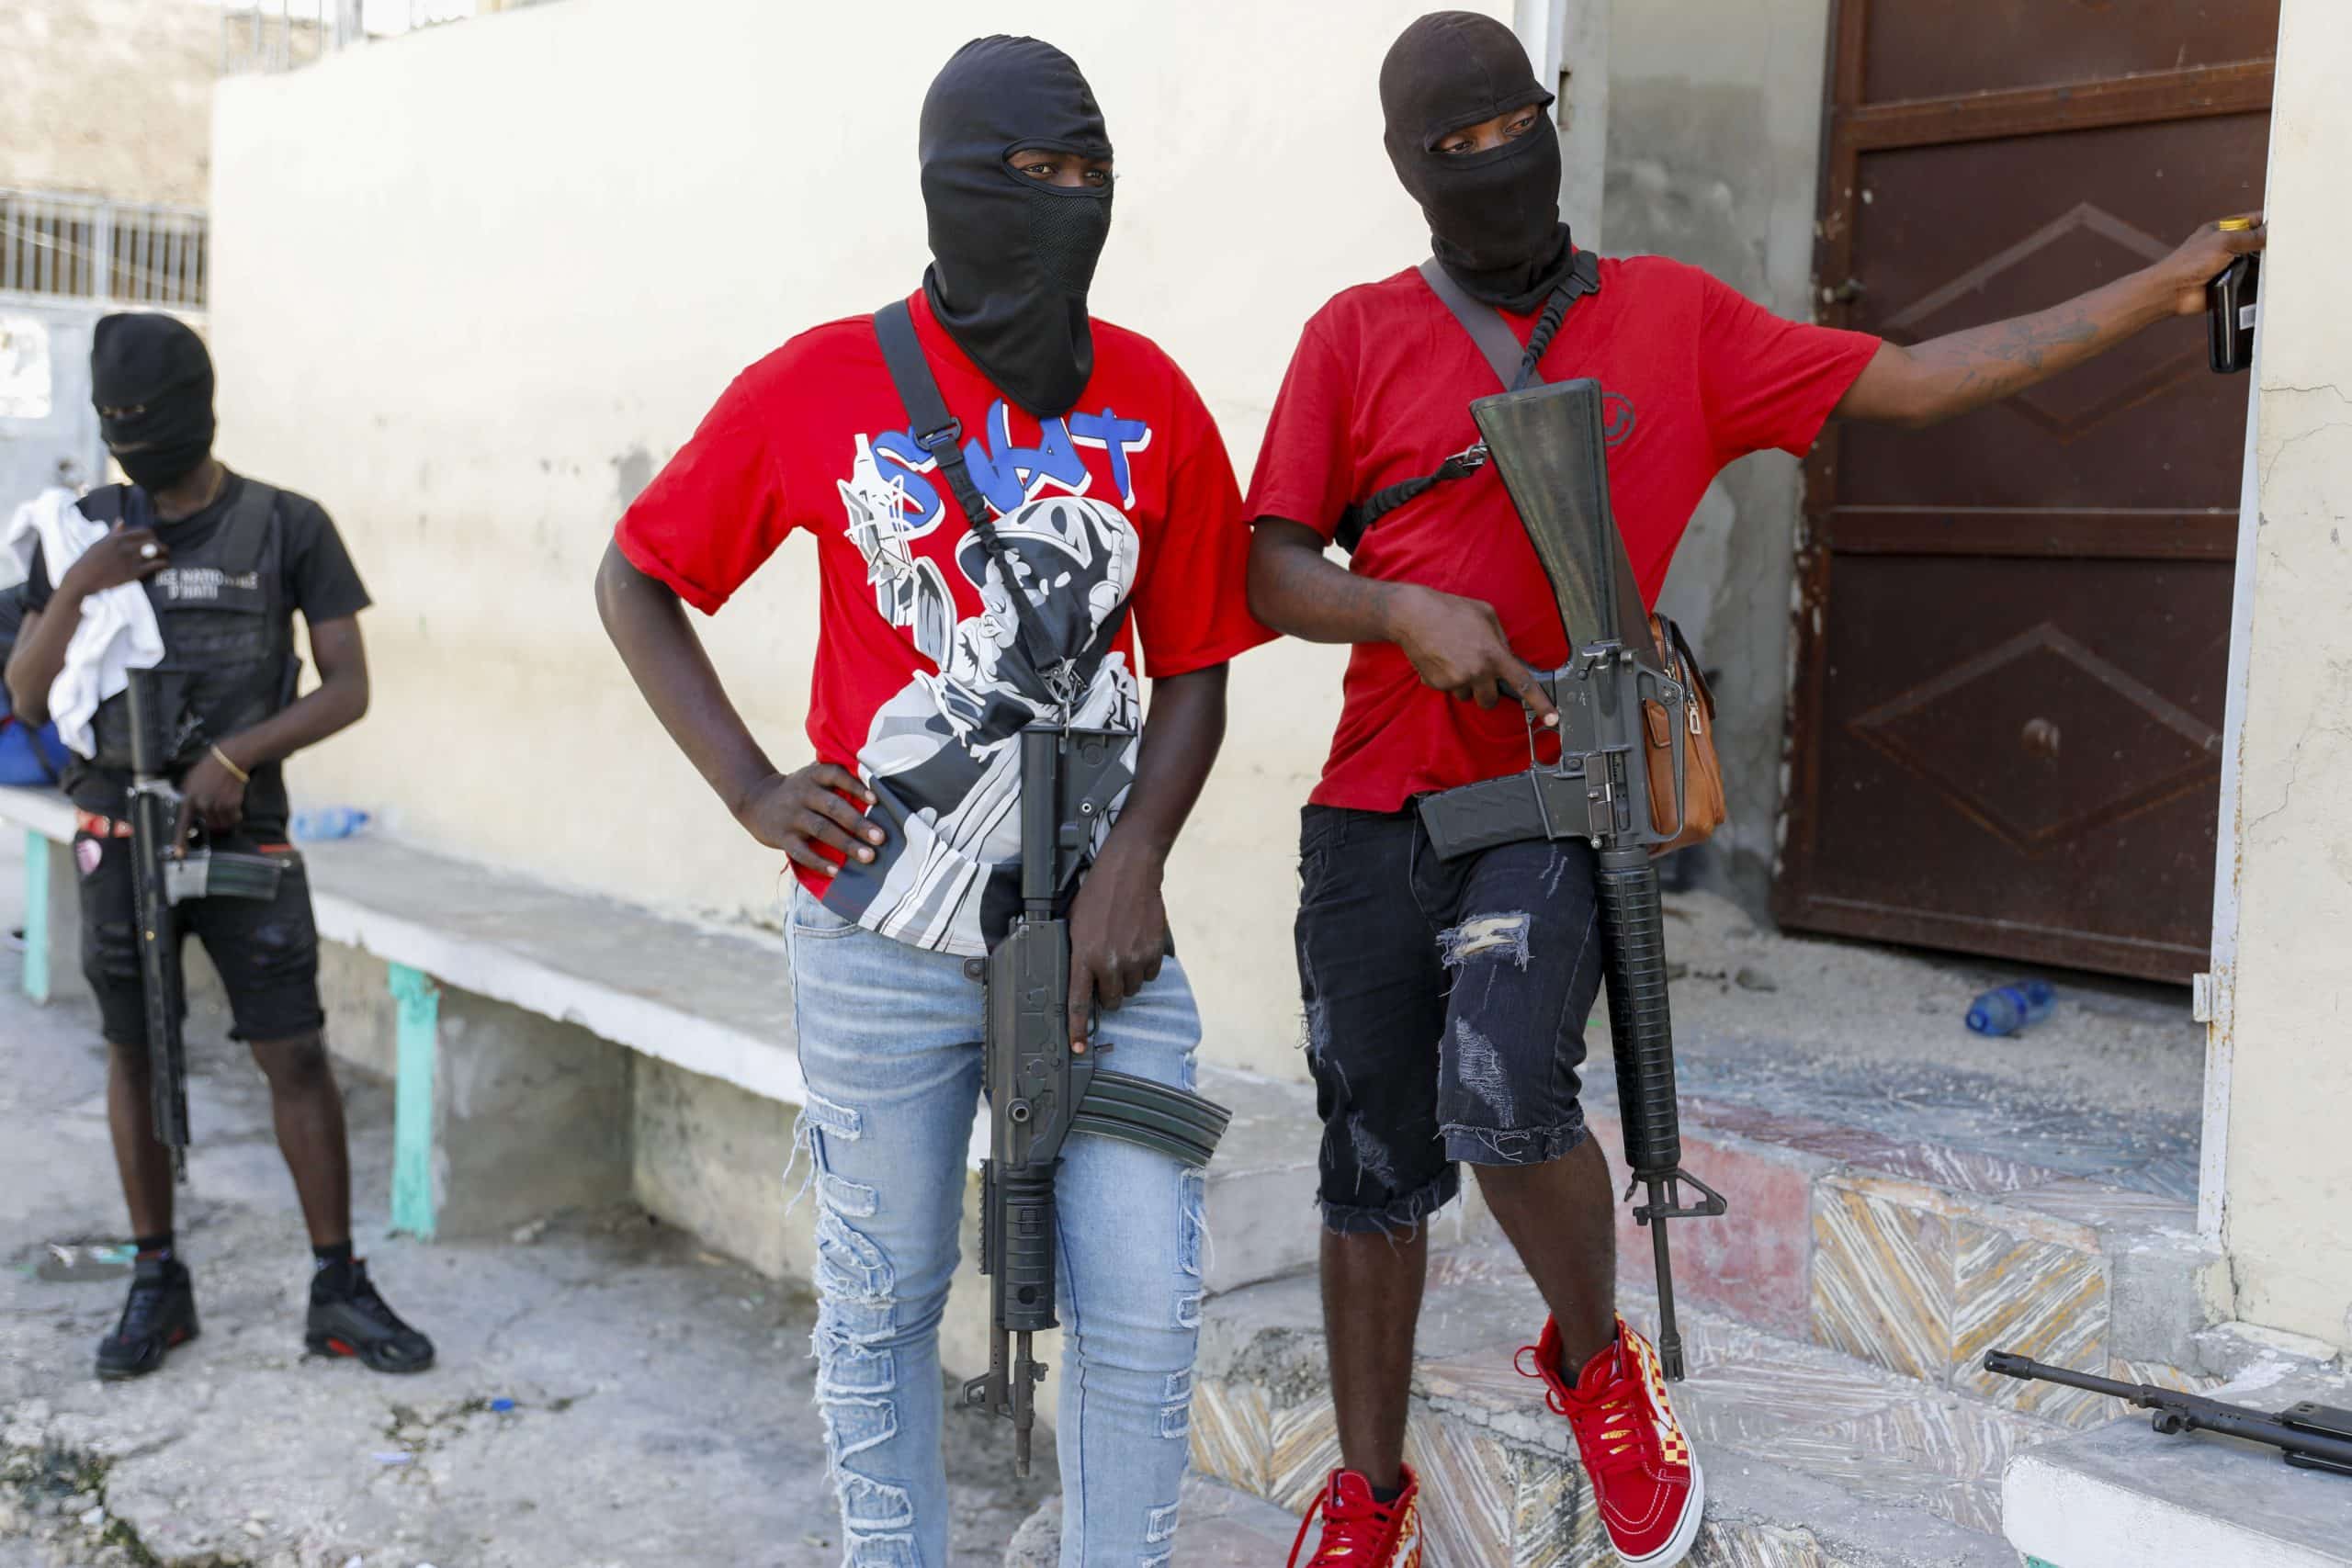 Politicians seek new alliances to lead Haiti as gangs take over and premier tries to return home – Metro US